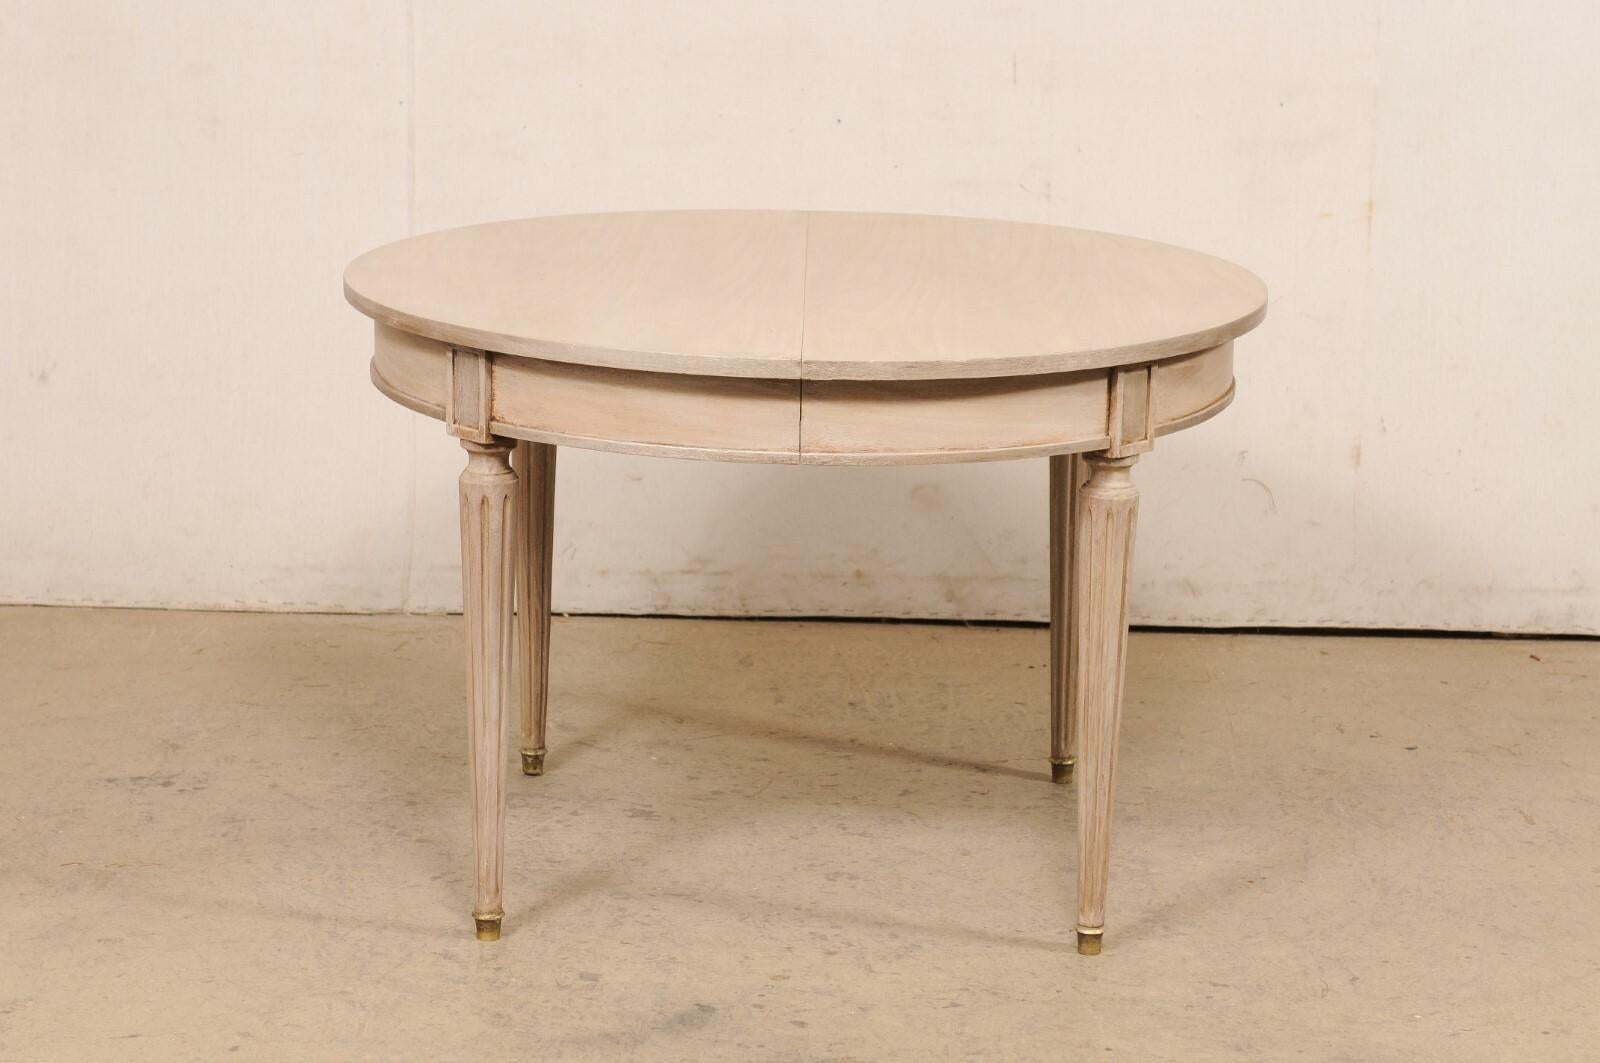 French Round Painted Wood Table w/Fluted Legs & Brass Feet, 3.5 Ft Diameter For Sale 5